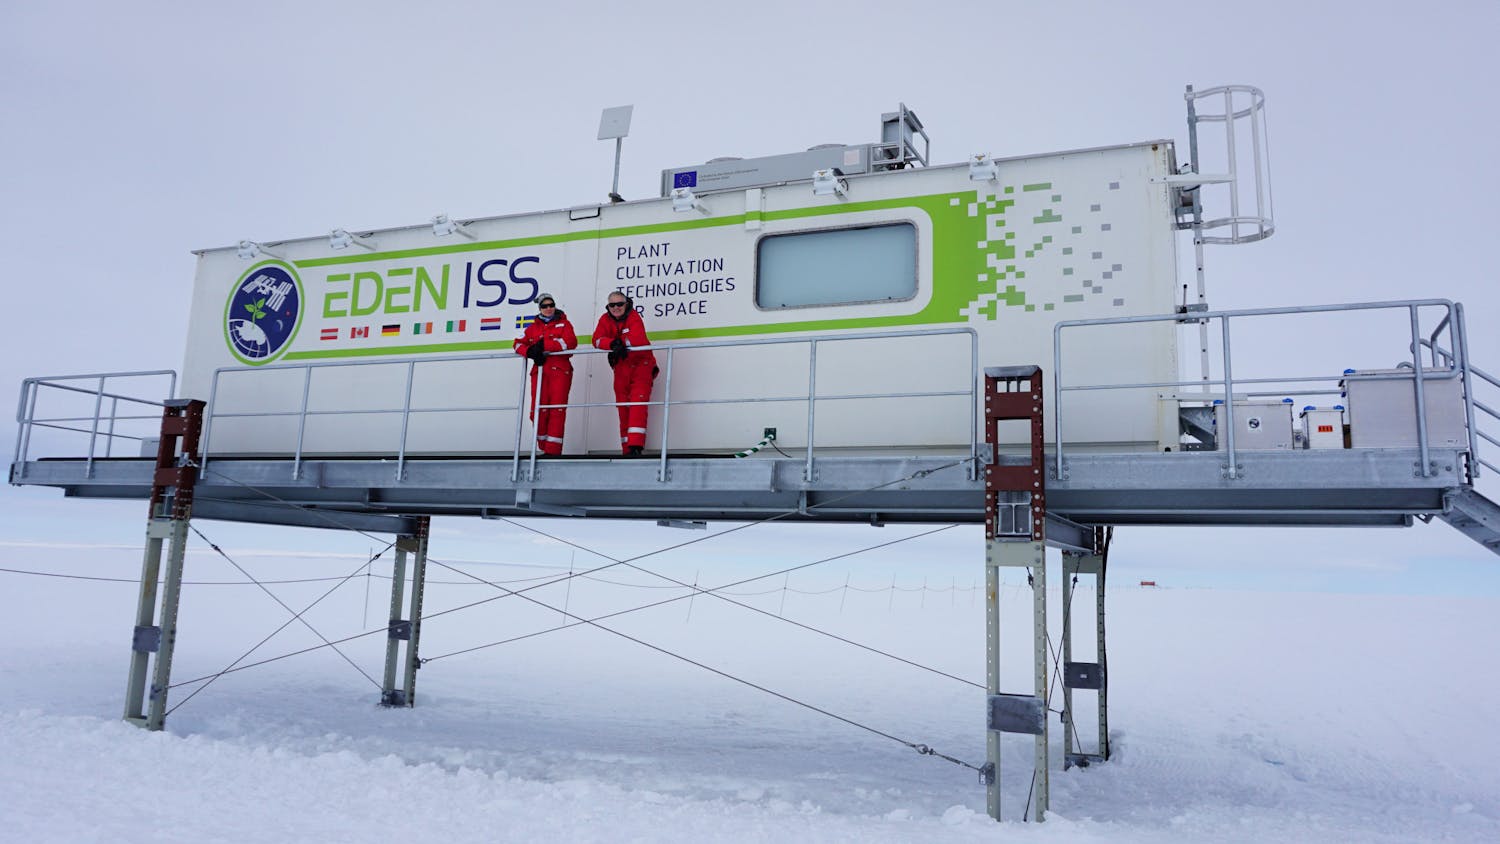 Anna-Lisa Paul (left) and Robert Ferl, (right) the principal investigators of the UF space plants lab, stand outside of the EDEN ISS greenhouse in Antarctica where plants are cultivated in extreme conditions with the goal of learning how to successfully grow plants in space.